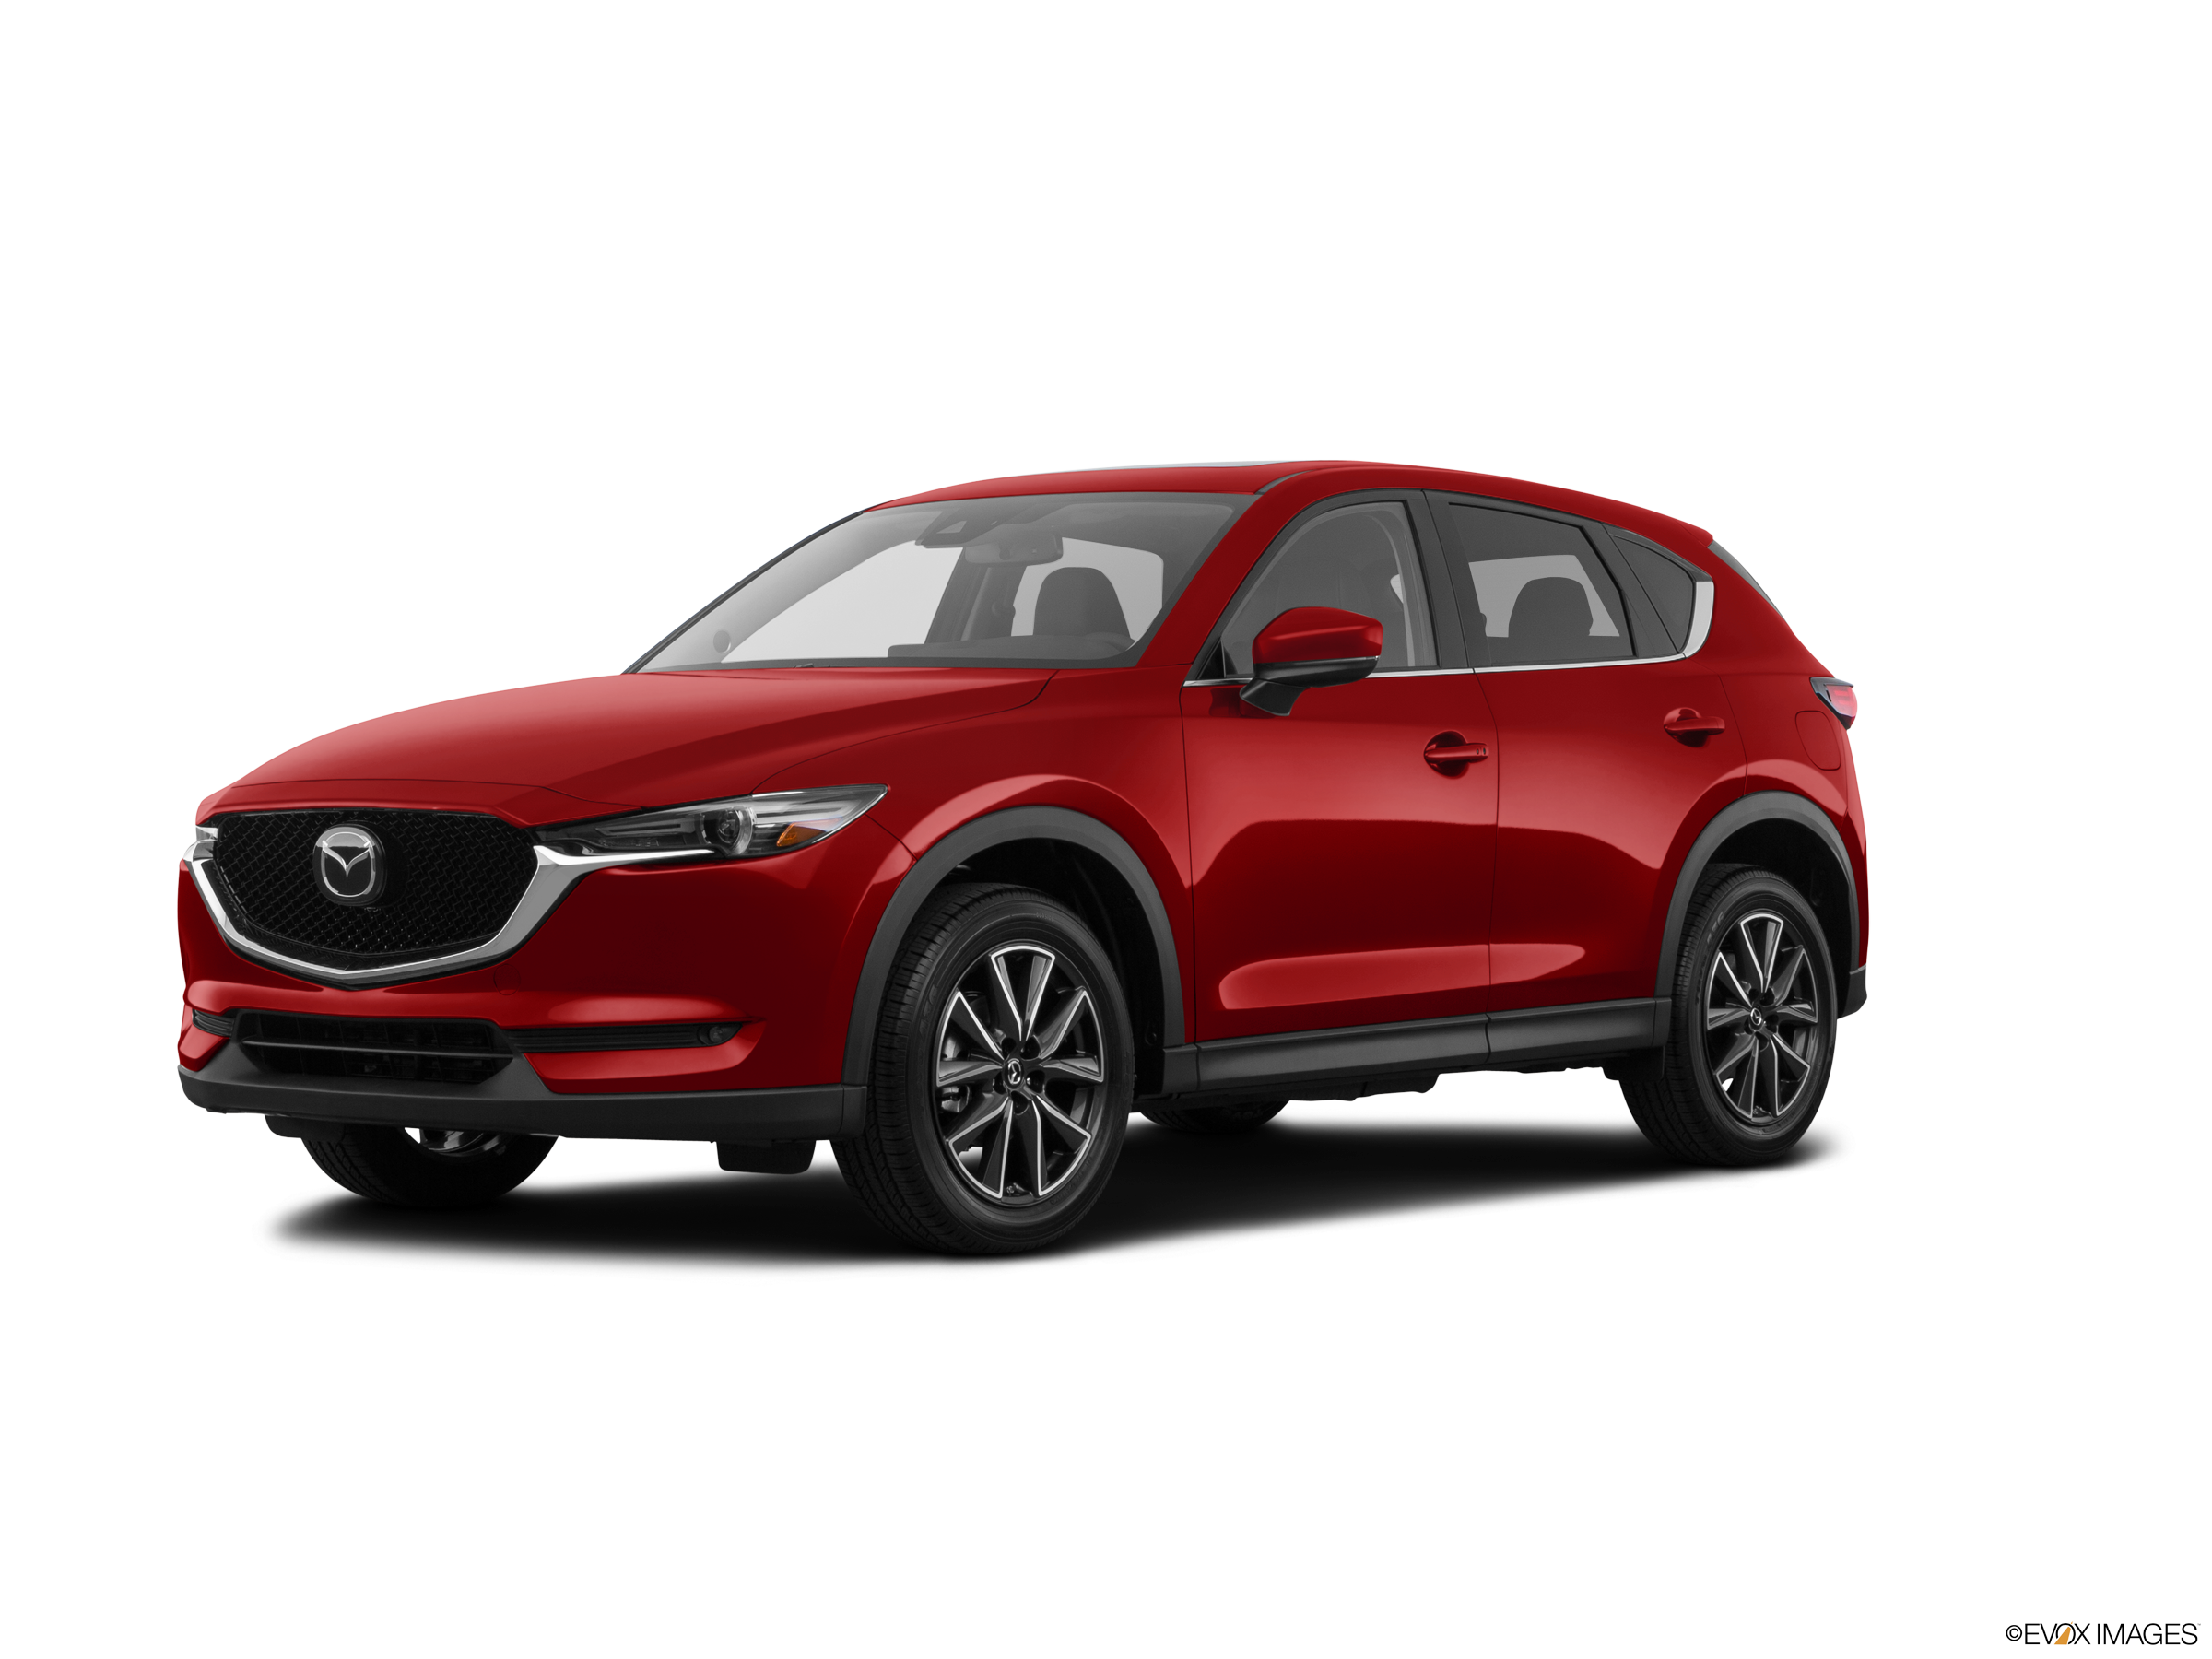 New 2019 MAZDA CX-5 Grand Touring Pricing | Kelley Blue Book